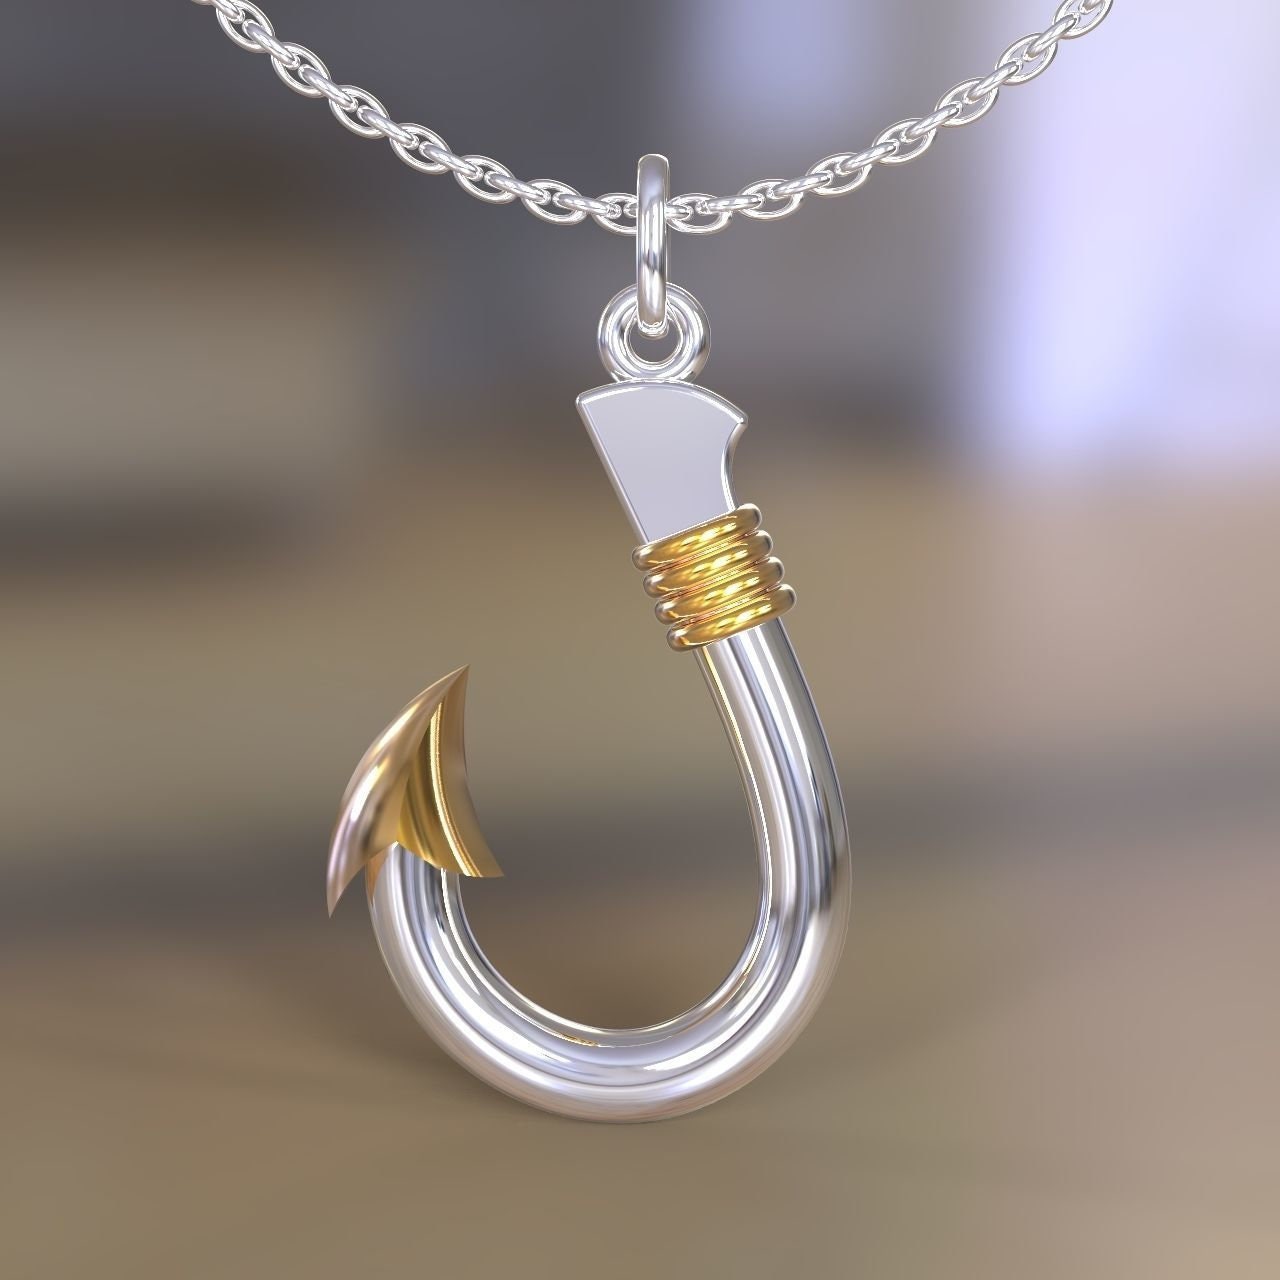 Perfect Cast Fishing Hook Pendant 10k/14k/18k White, Yellow, Rose, Green  Gold and Silver Fish Rod Fisherman Boat Ship Water Charm Necklace -   Norway